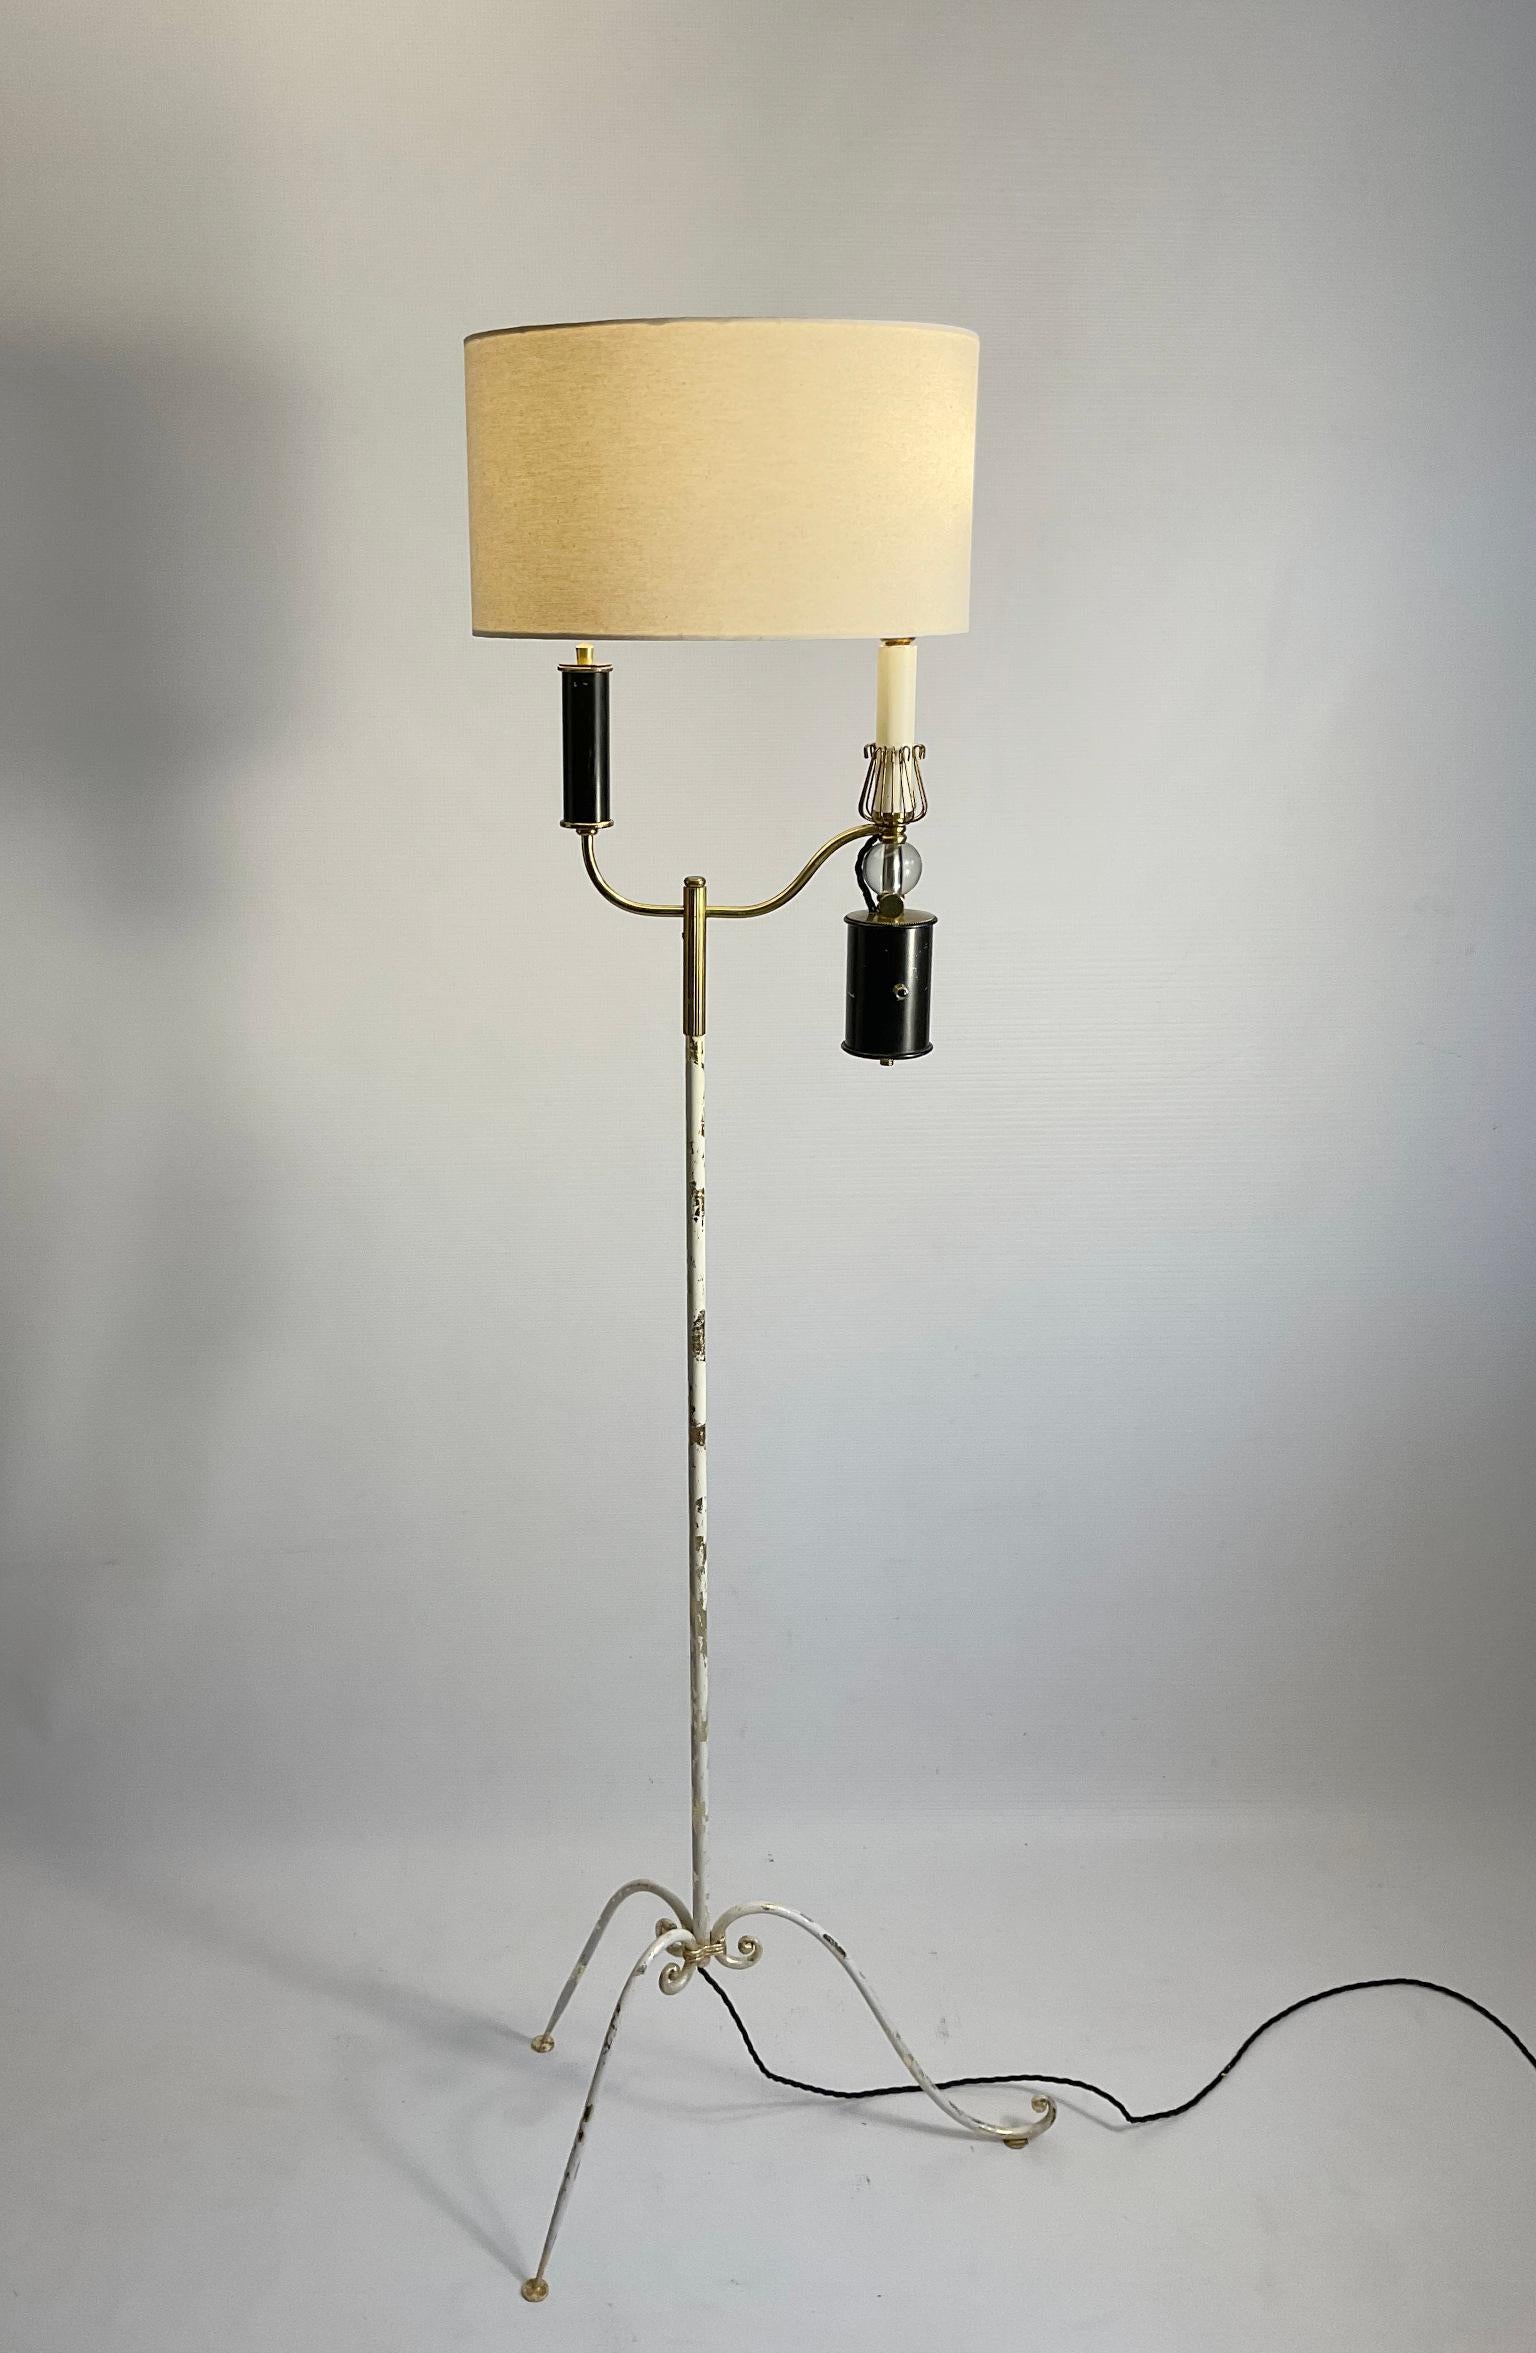 Metalwork 1950s Floor Lamp Attributed to Maison Lunel France For Sale